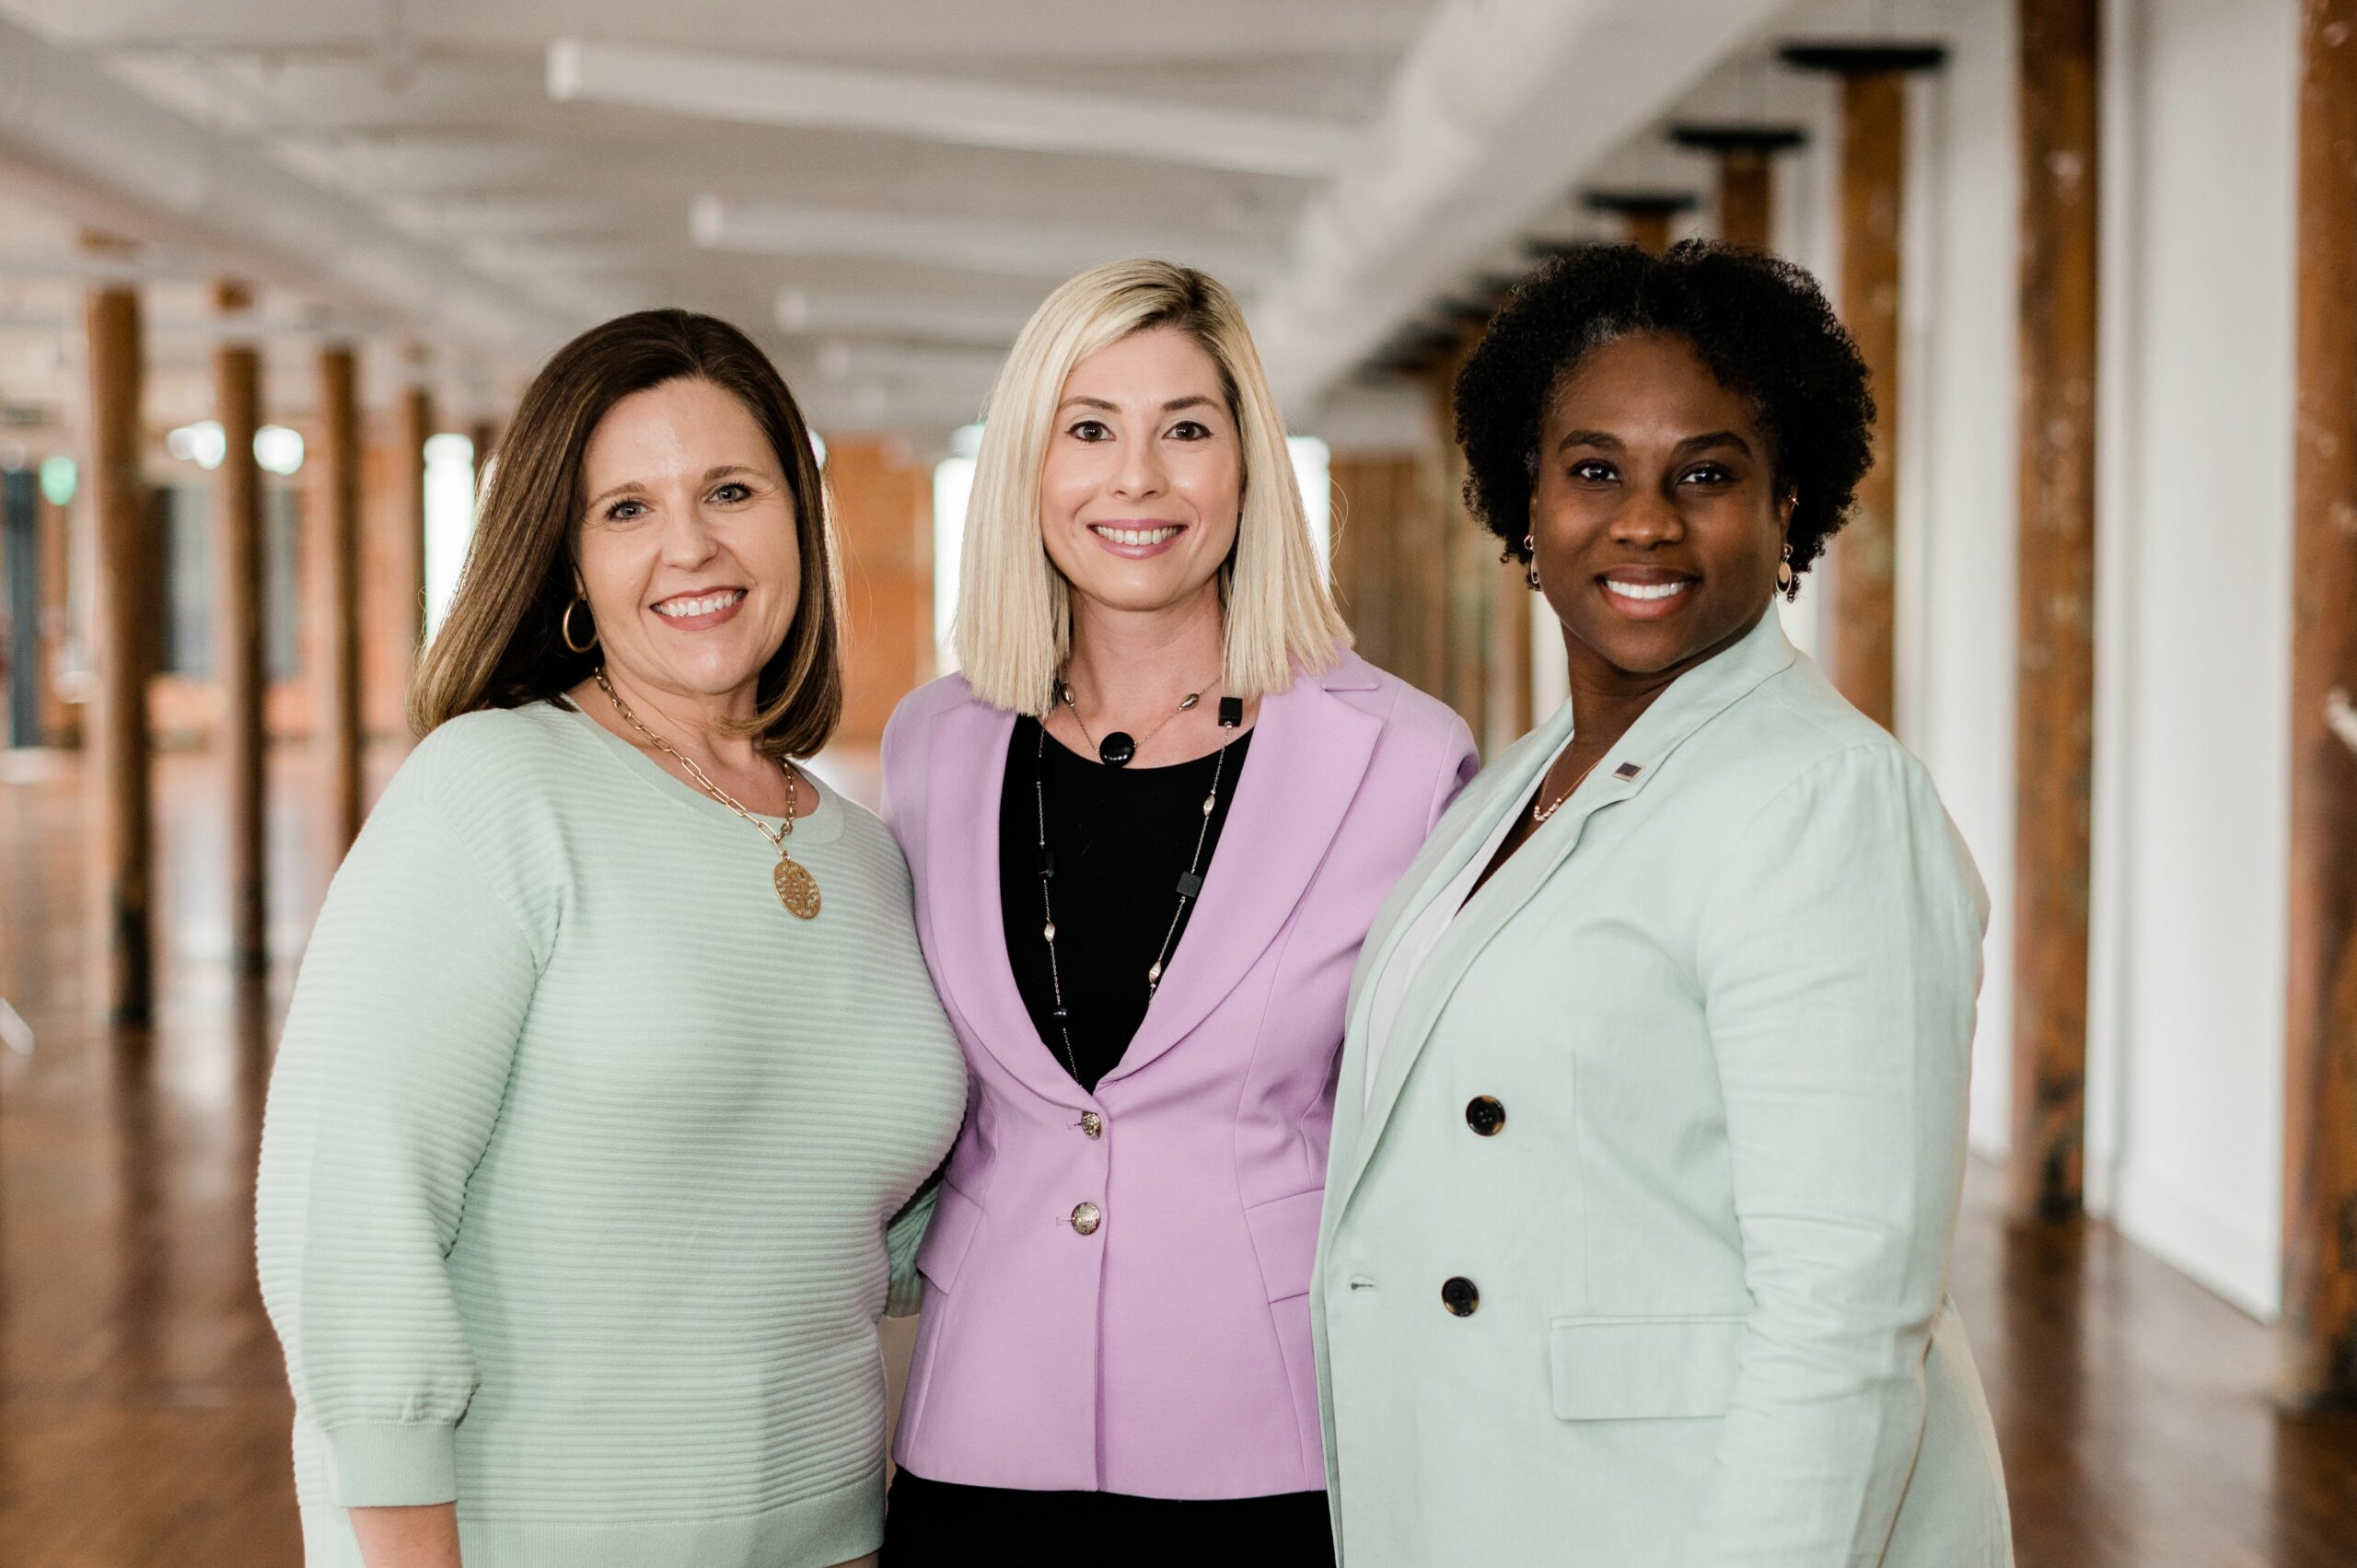 (From L to R): Tammy Nagem President and CEO of High Point Market Authority; Rachel Collins, President & CEO, Business High Point; Tasha Logan Ford, City Manager.